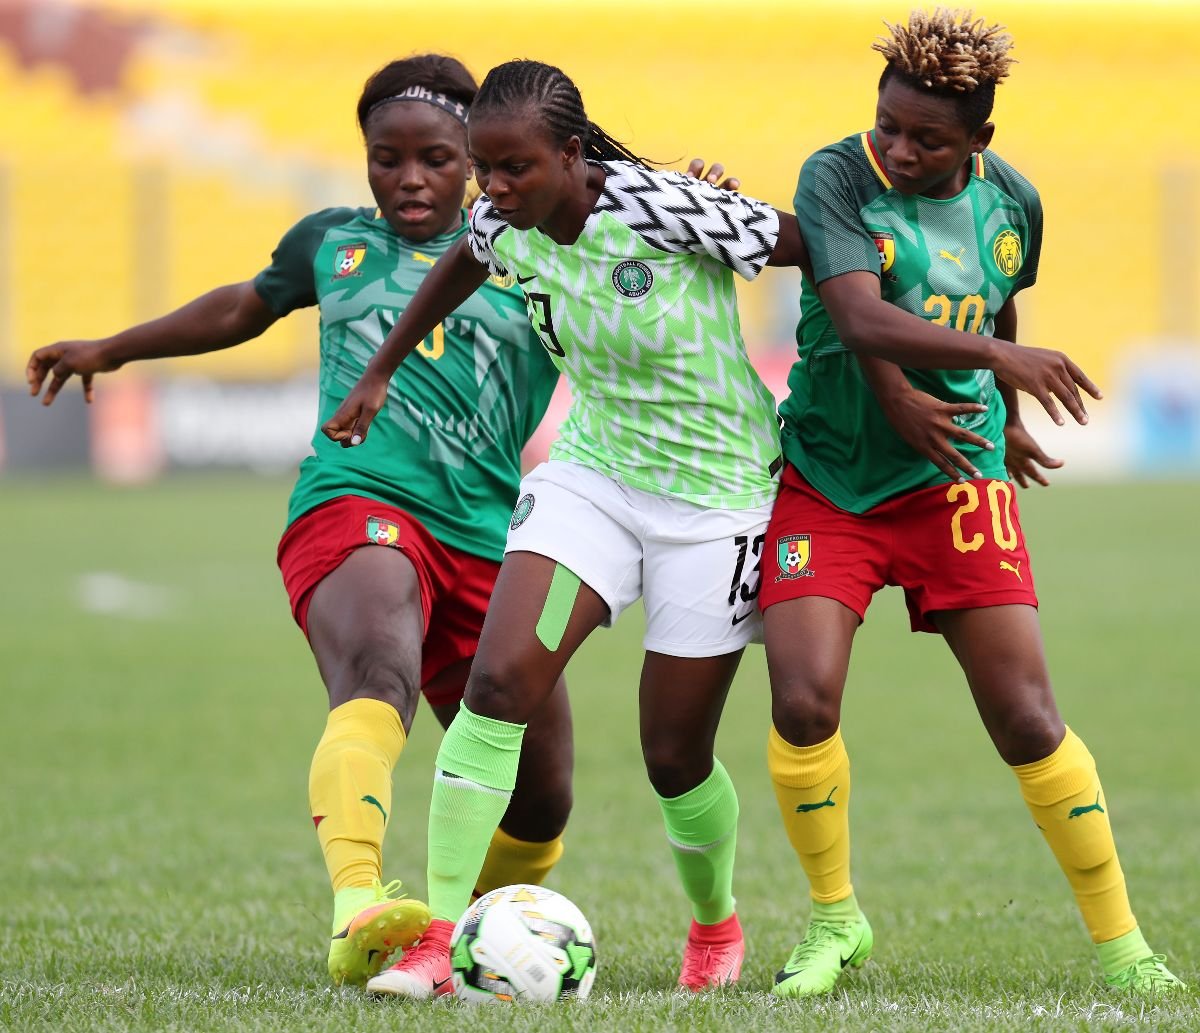 Caf announce Women’s Football Strategy to grow the game in Africa - Sports Leo